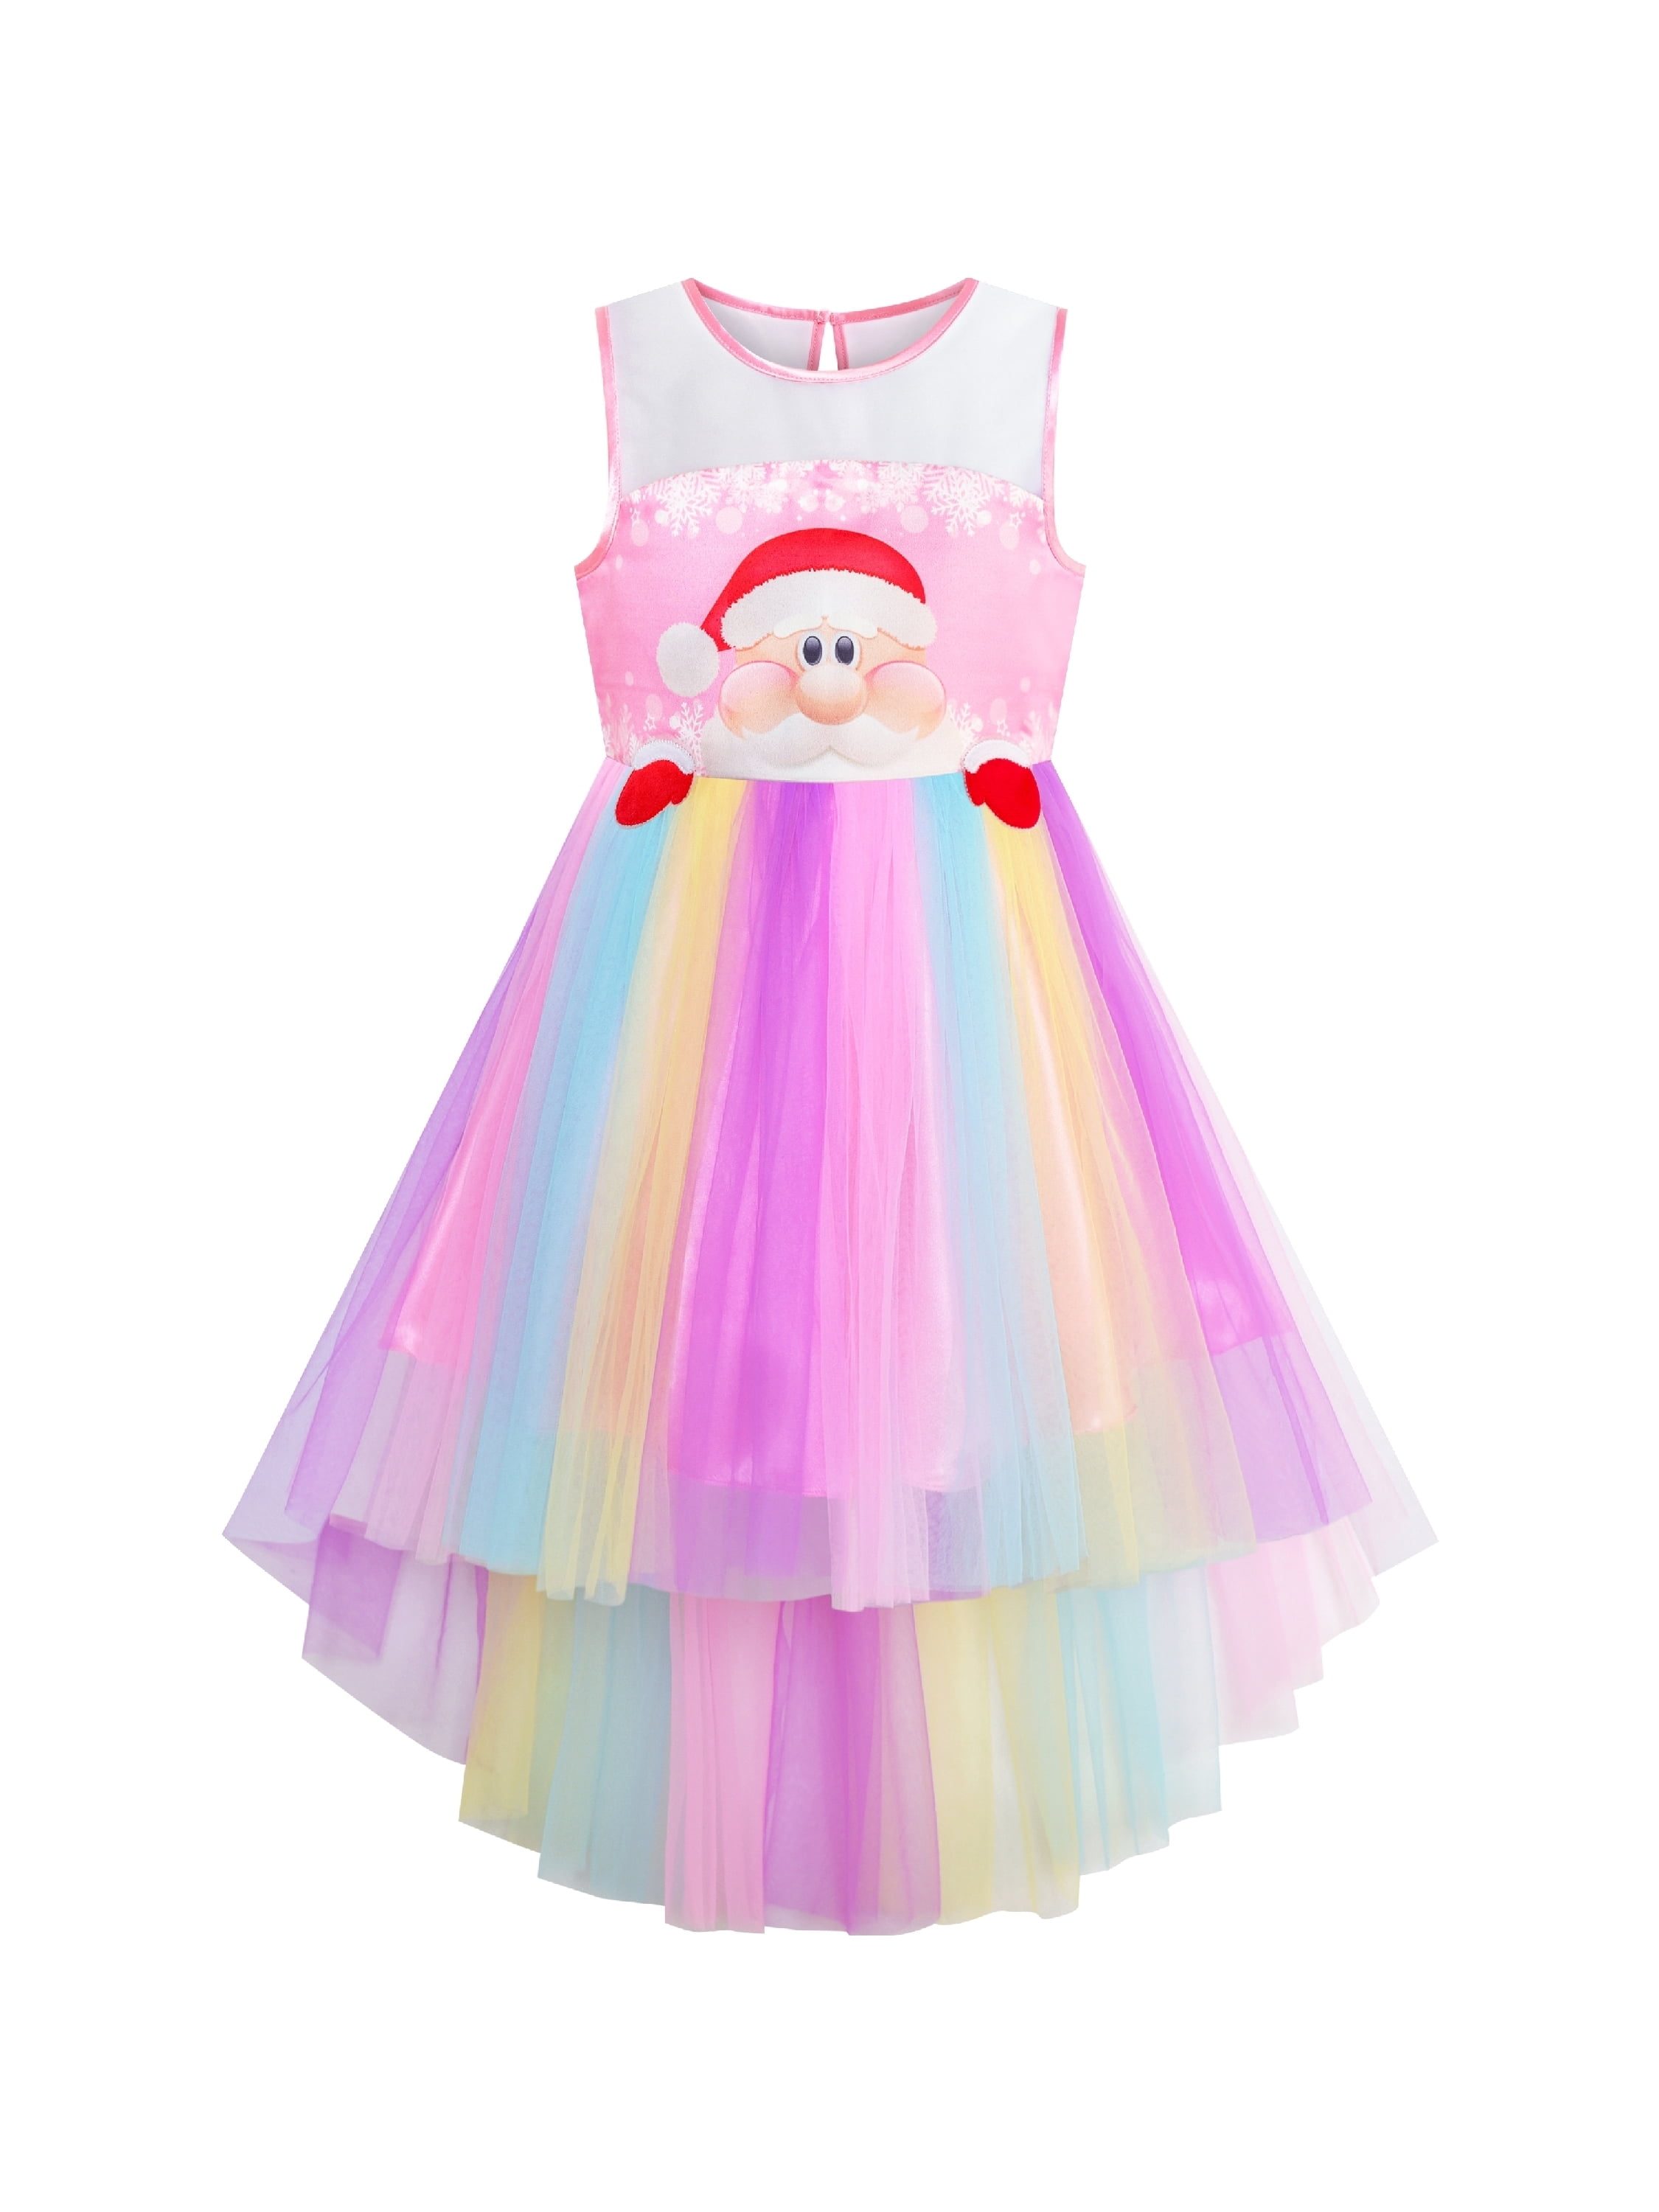 Details about   Kids Girls Tutu Dress Christmas Halloween Costume Set Party Cosplay Skirt Outfit 